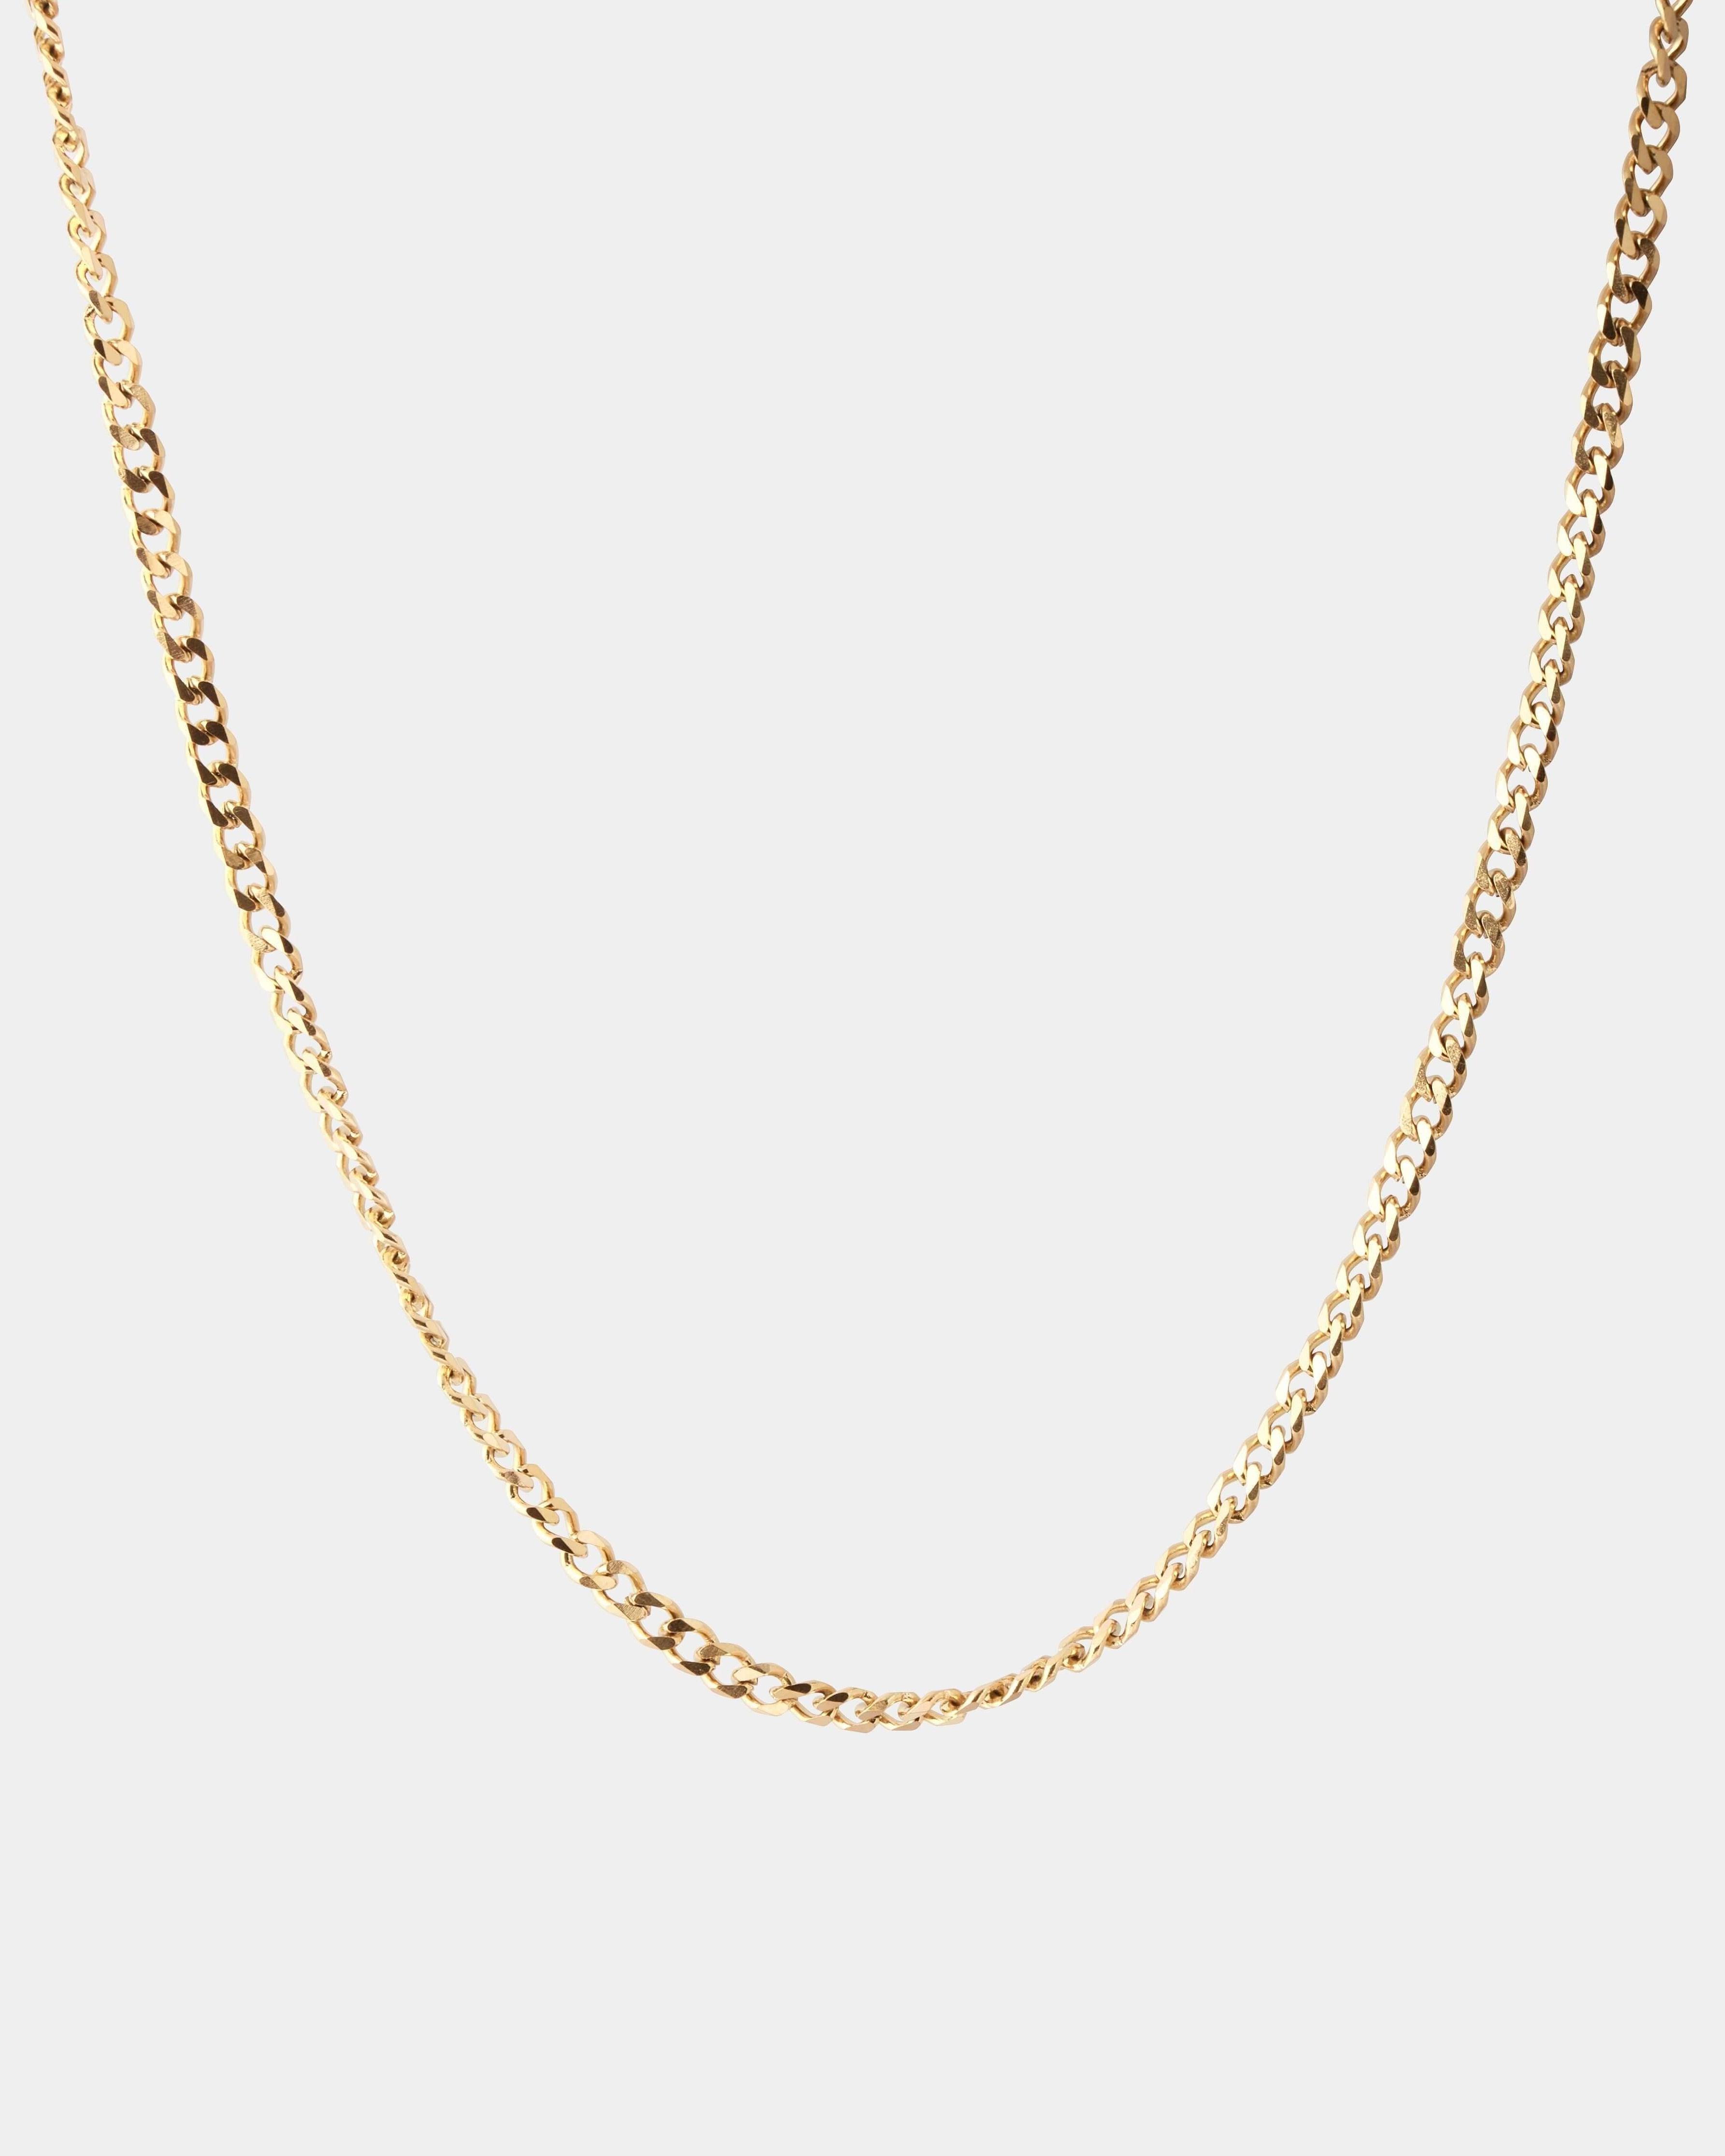 CURB CHAIN NECKLACE - LIMELY